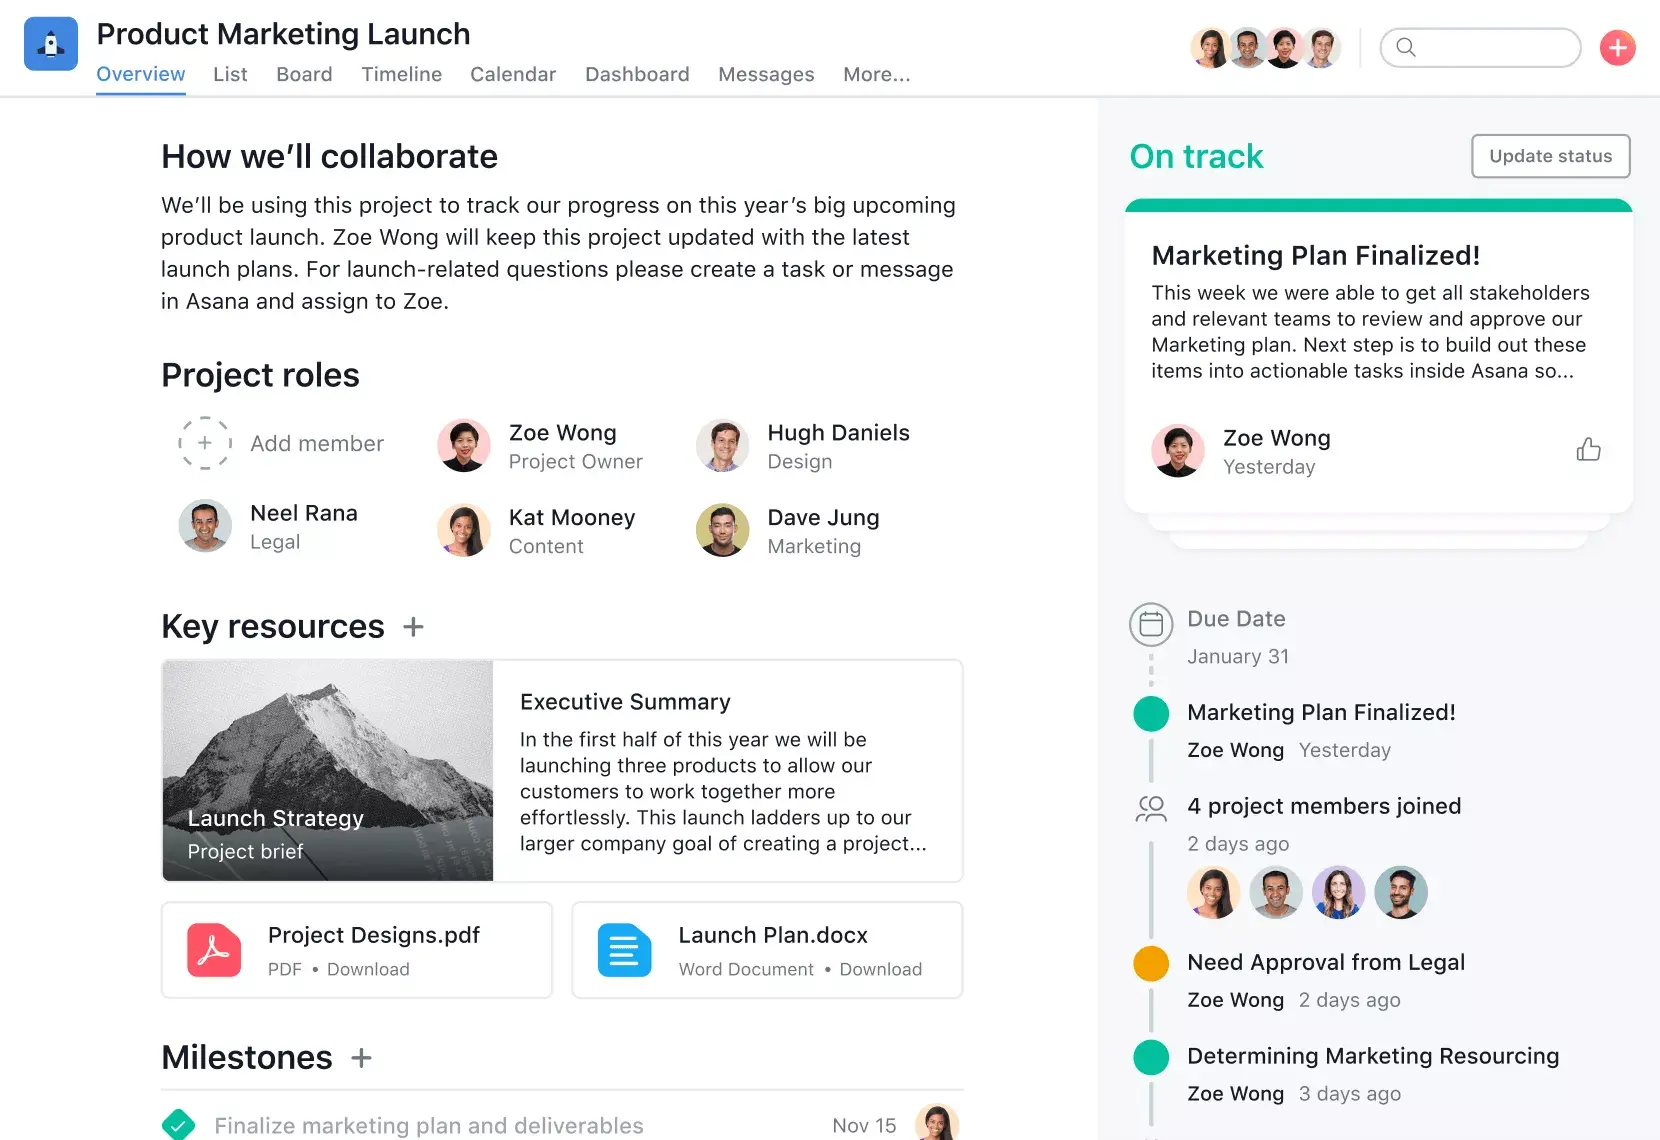 [Product UI] Product marketing launch project overview report in Asana (Project Overview)